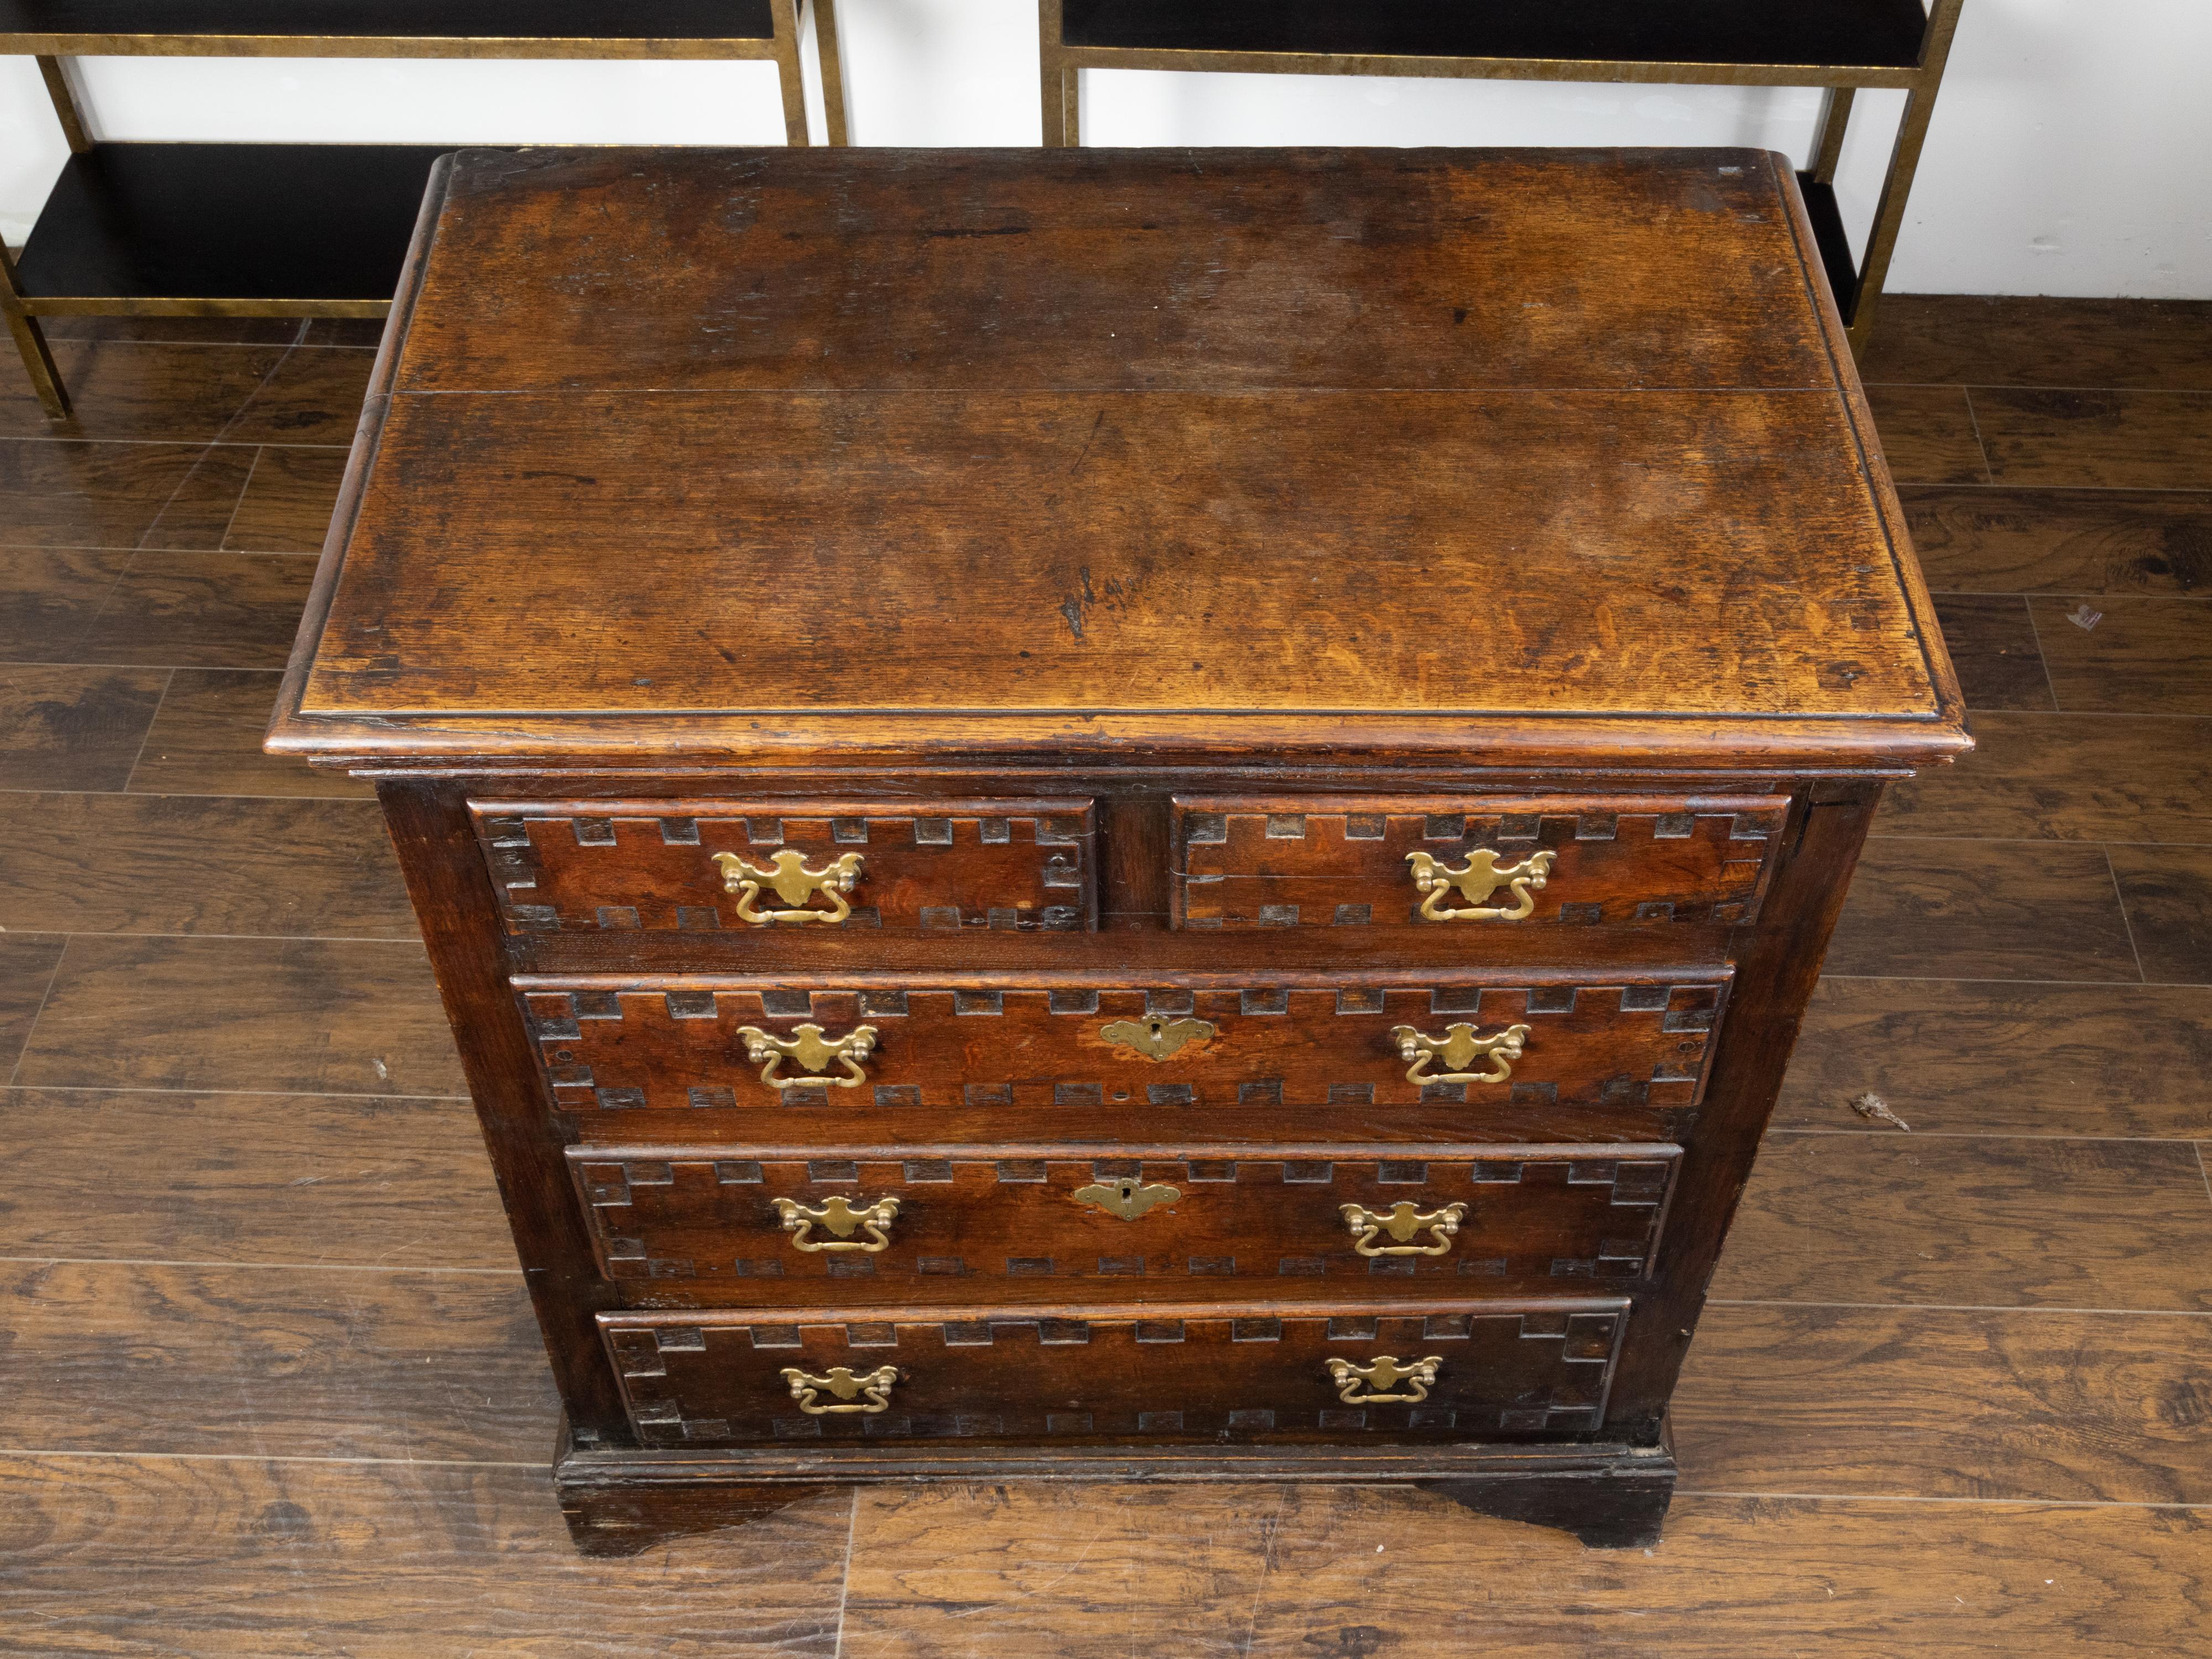 An English Georgian period oak chest from the early 19th century, with five drawers and carved square motifs. Created in England during the early years of the 19th century, this Georgian oak chest features a rectangular top with beveled edges,